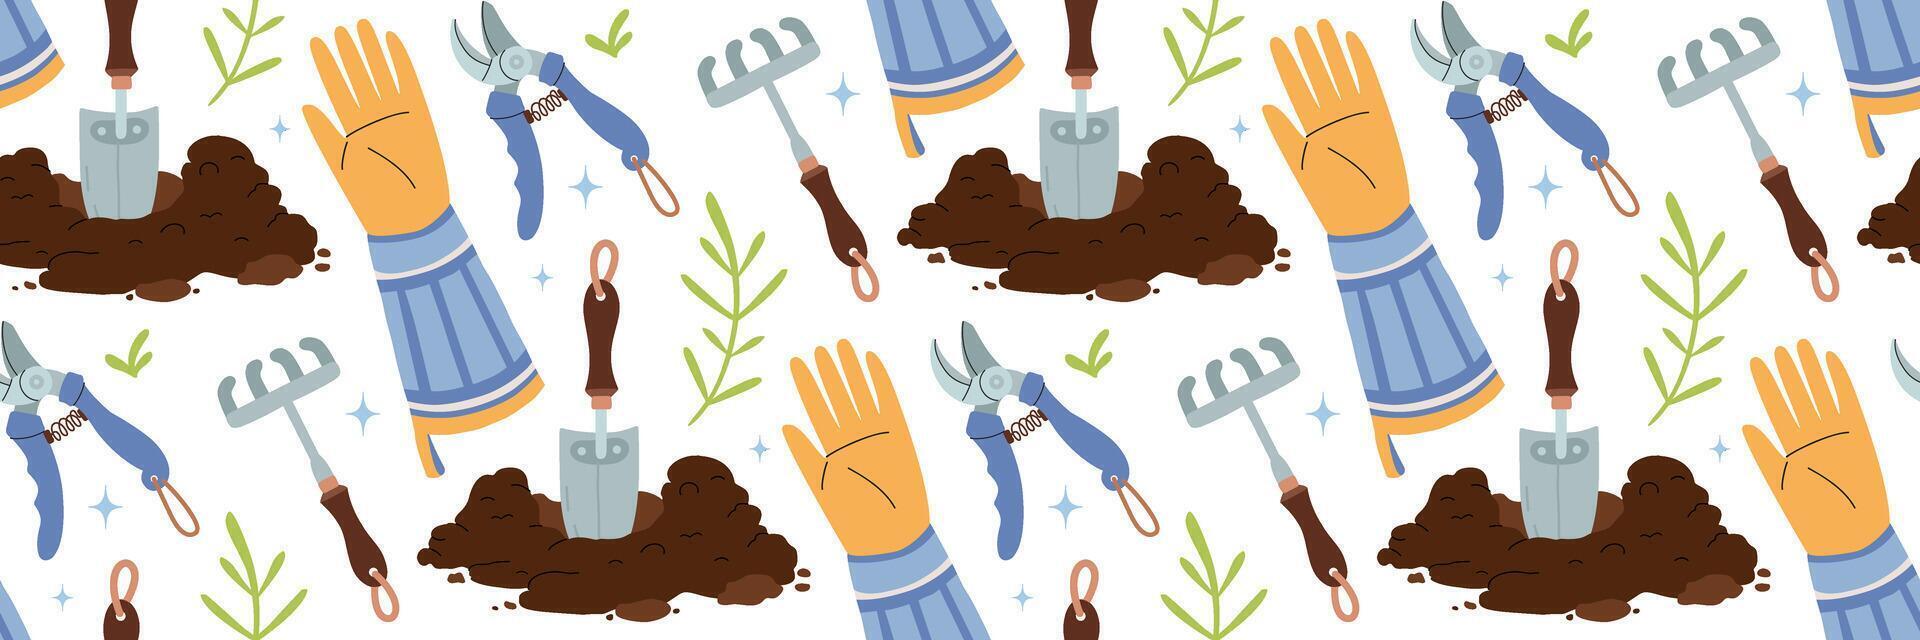 Garden growing tools pattern. Agriculture Items shovel, Hole of earth, yellow gardening gloves, rake, pruner. Growing vegetables, flowers. Background for textile, wallpaper. Vector flat illustration.